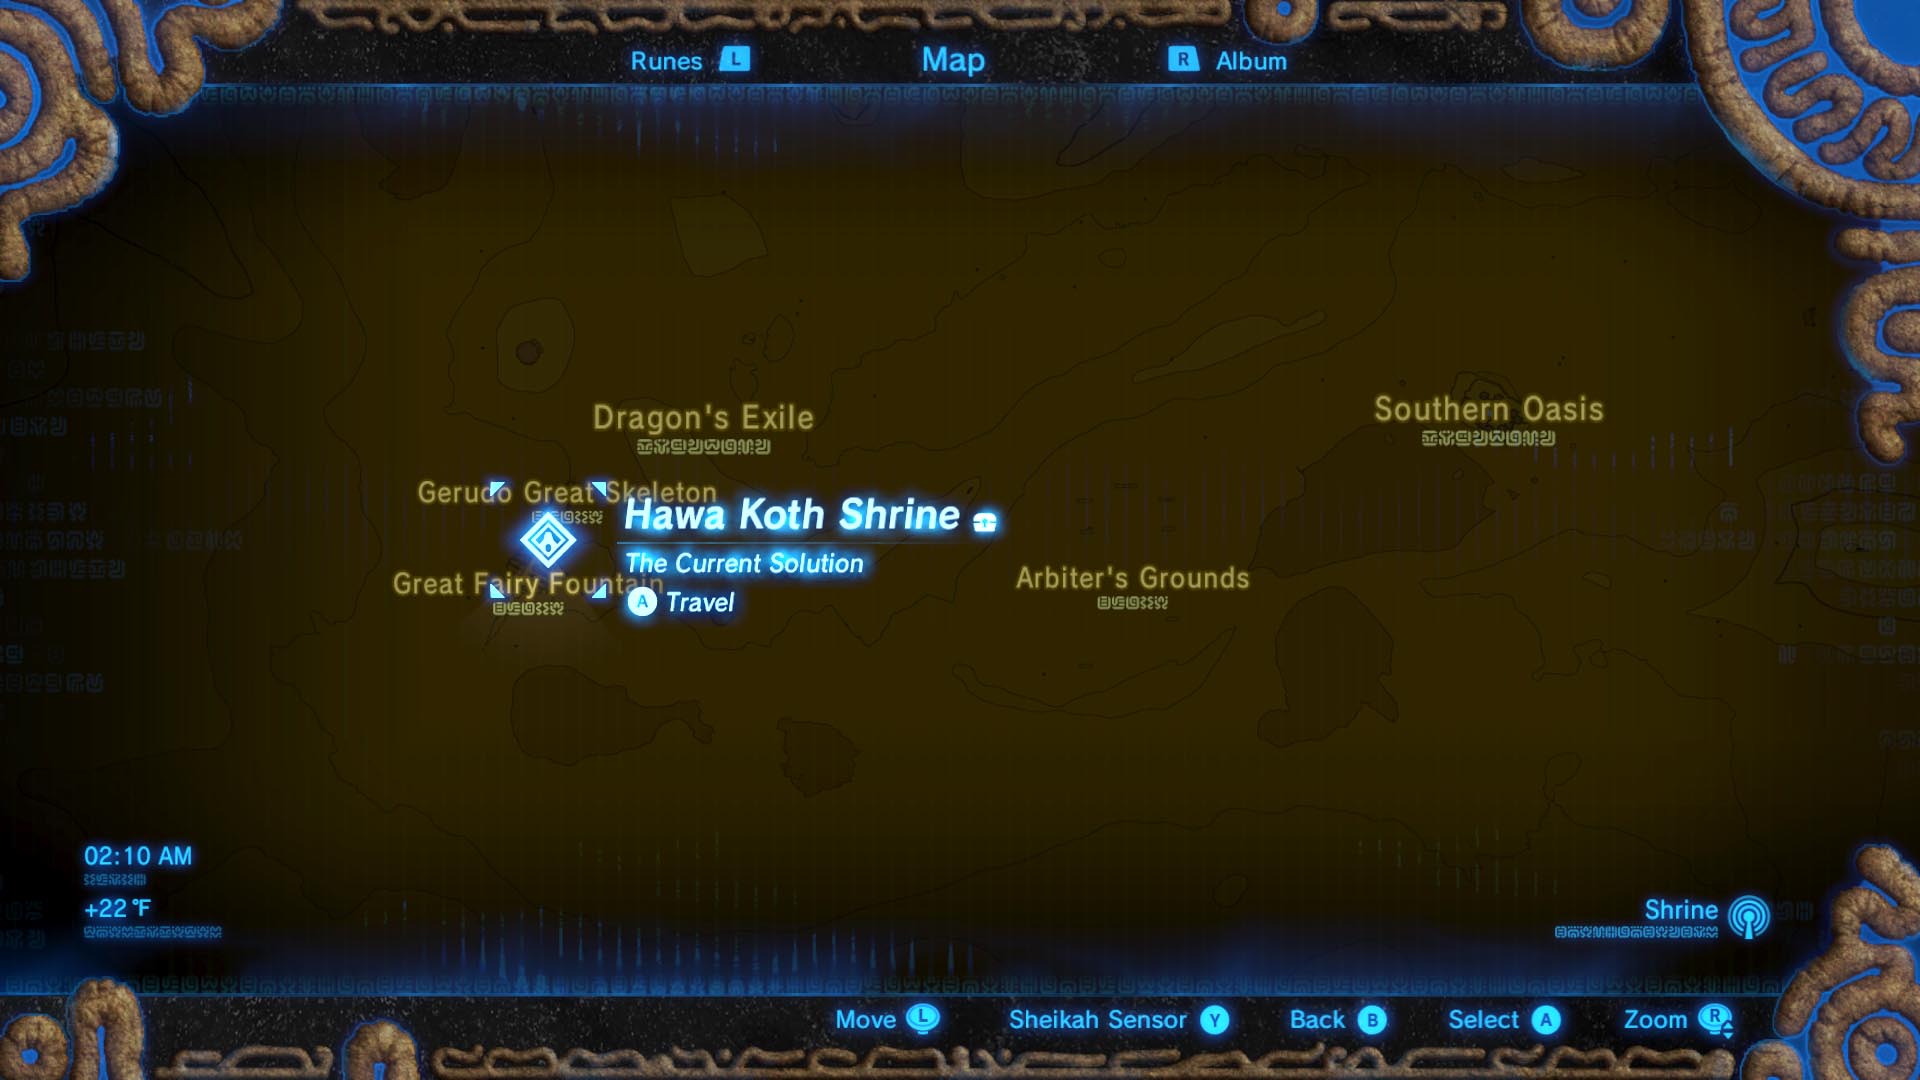 How to find Hawa Koth shrine.